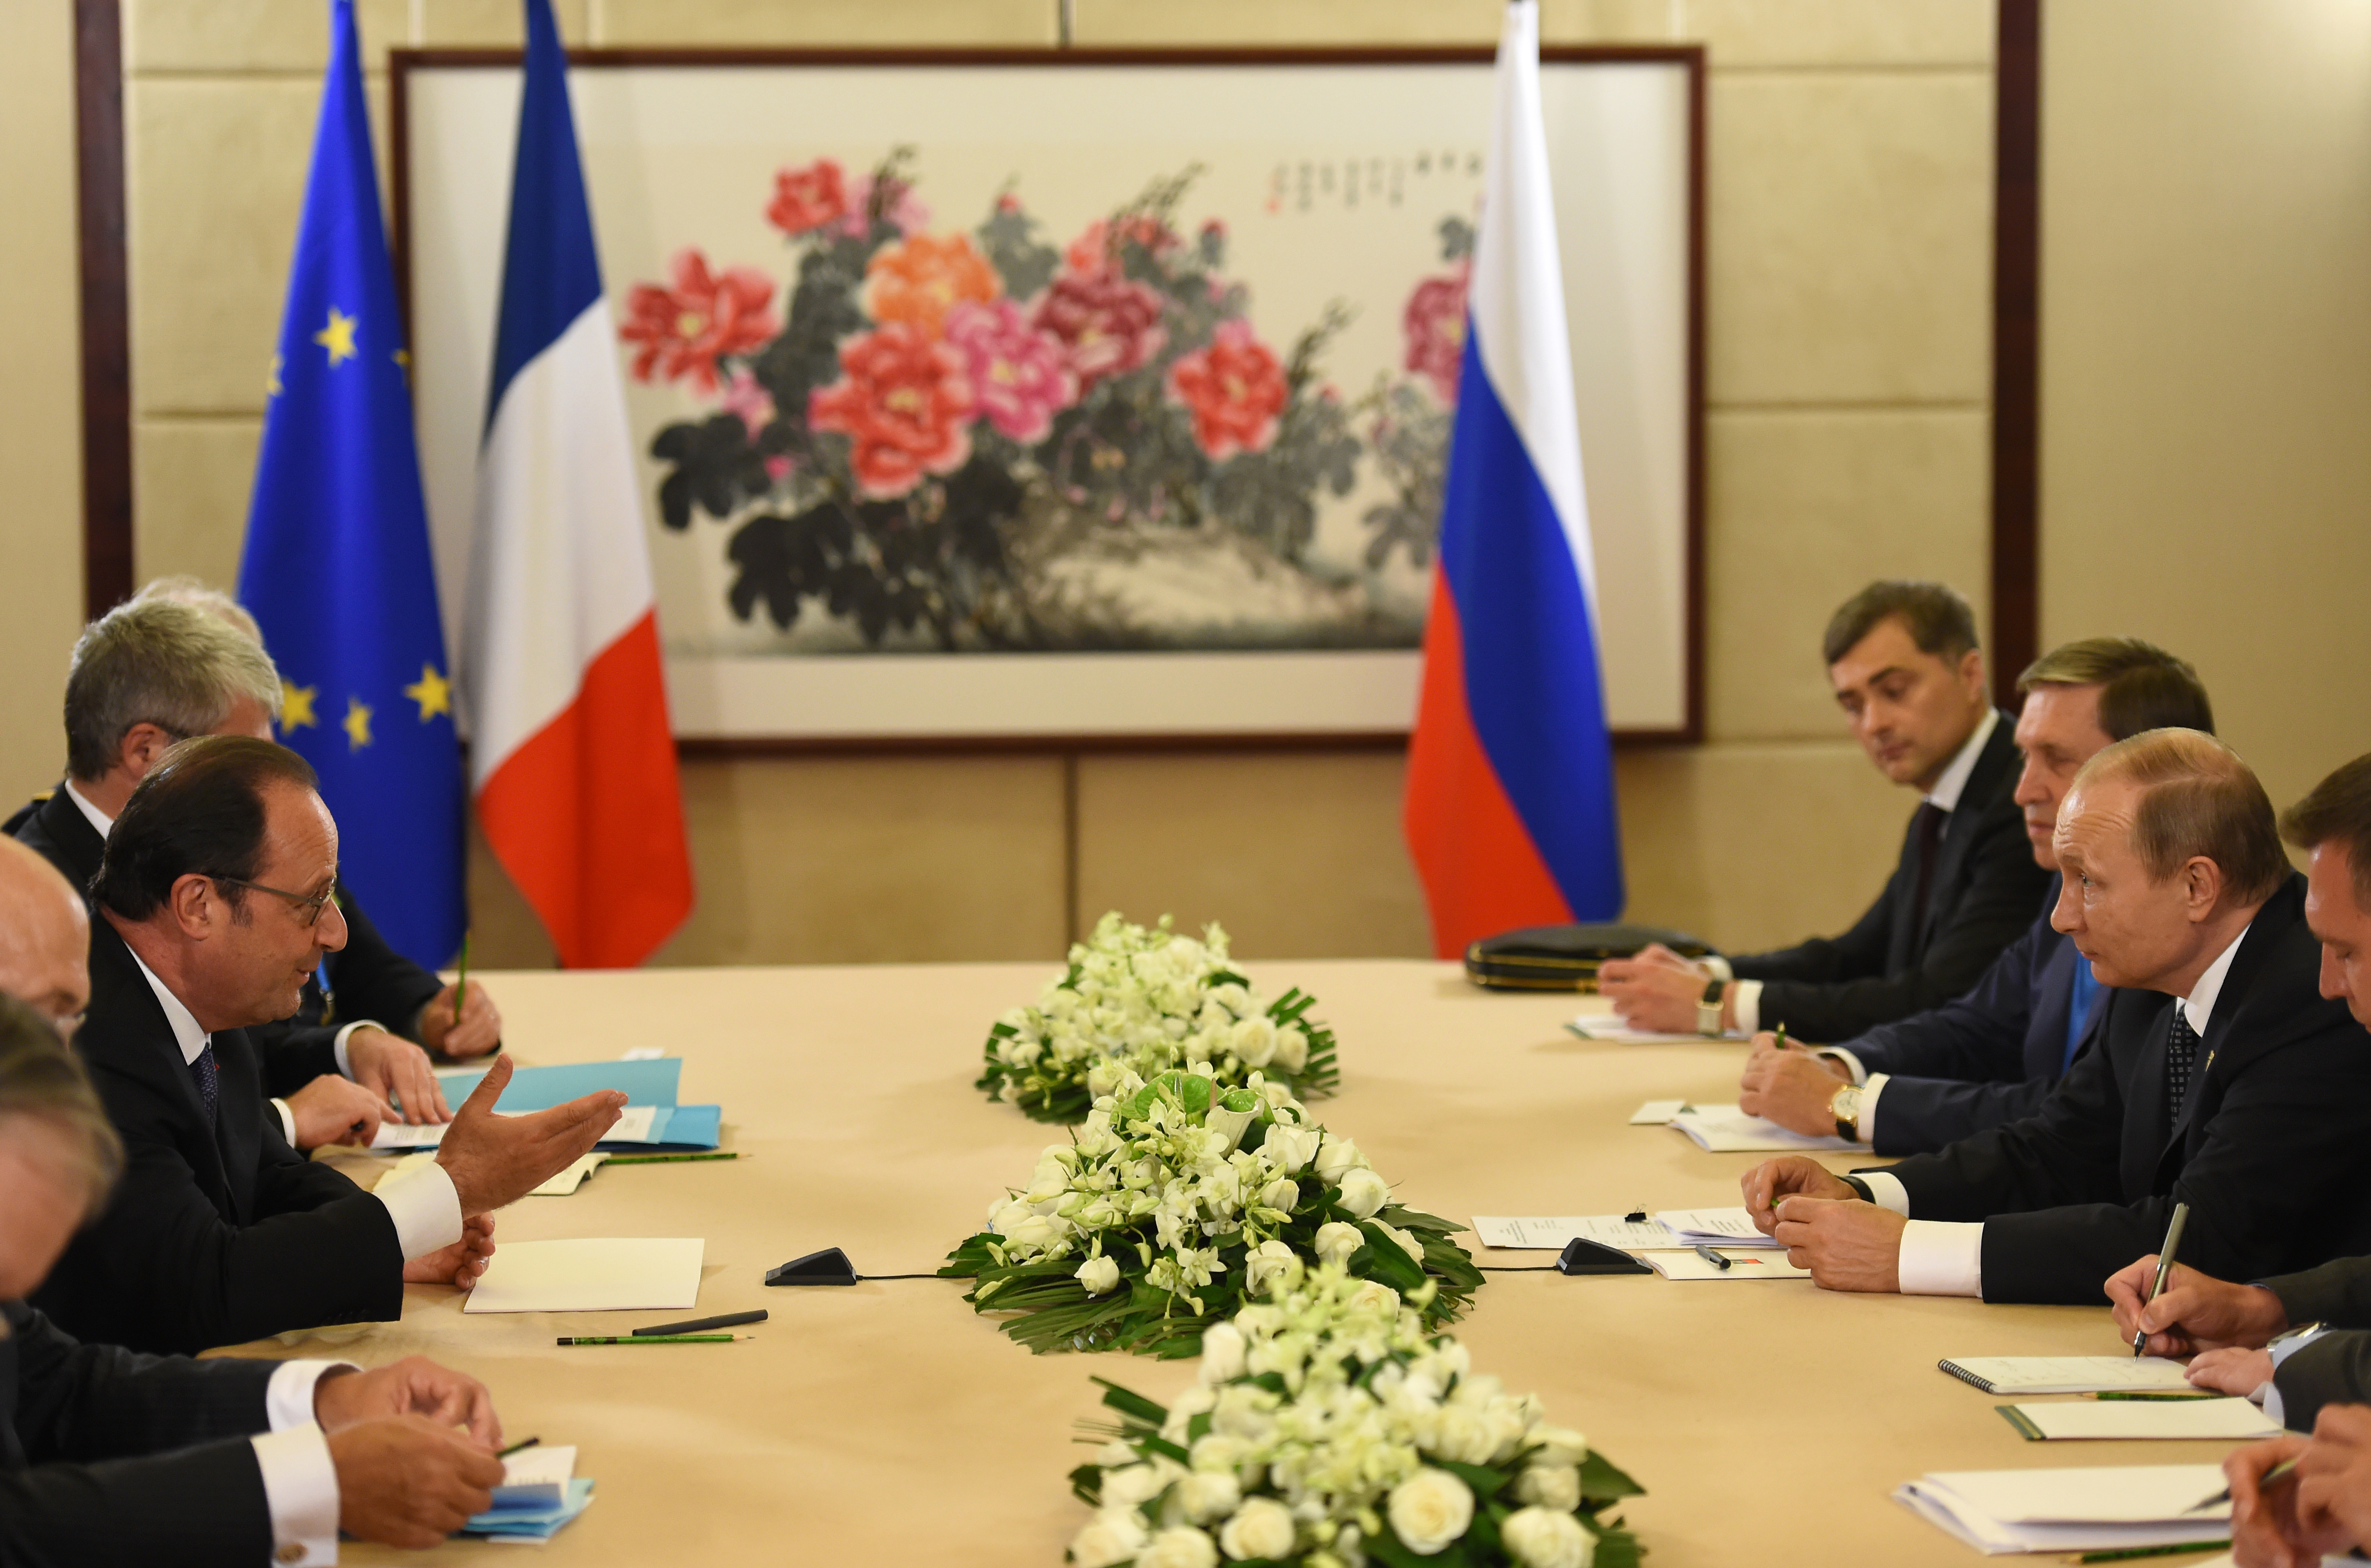 France's President Francois Hollande (L) meets with Russia's President Vladimir Putin (R) during the G20 Leaders Summit in Hangzhou, Zhejiang province, on September 4, 2016.  G20 leaders confront a sluggish global economy and the winds of populism as they open annual talks, but the long war in Syria and the South China Sea territorial dispute hang over the summit.  / AFP PHOTO / STEPHANE DE SAKUTIN